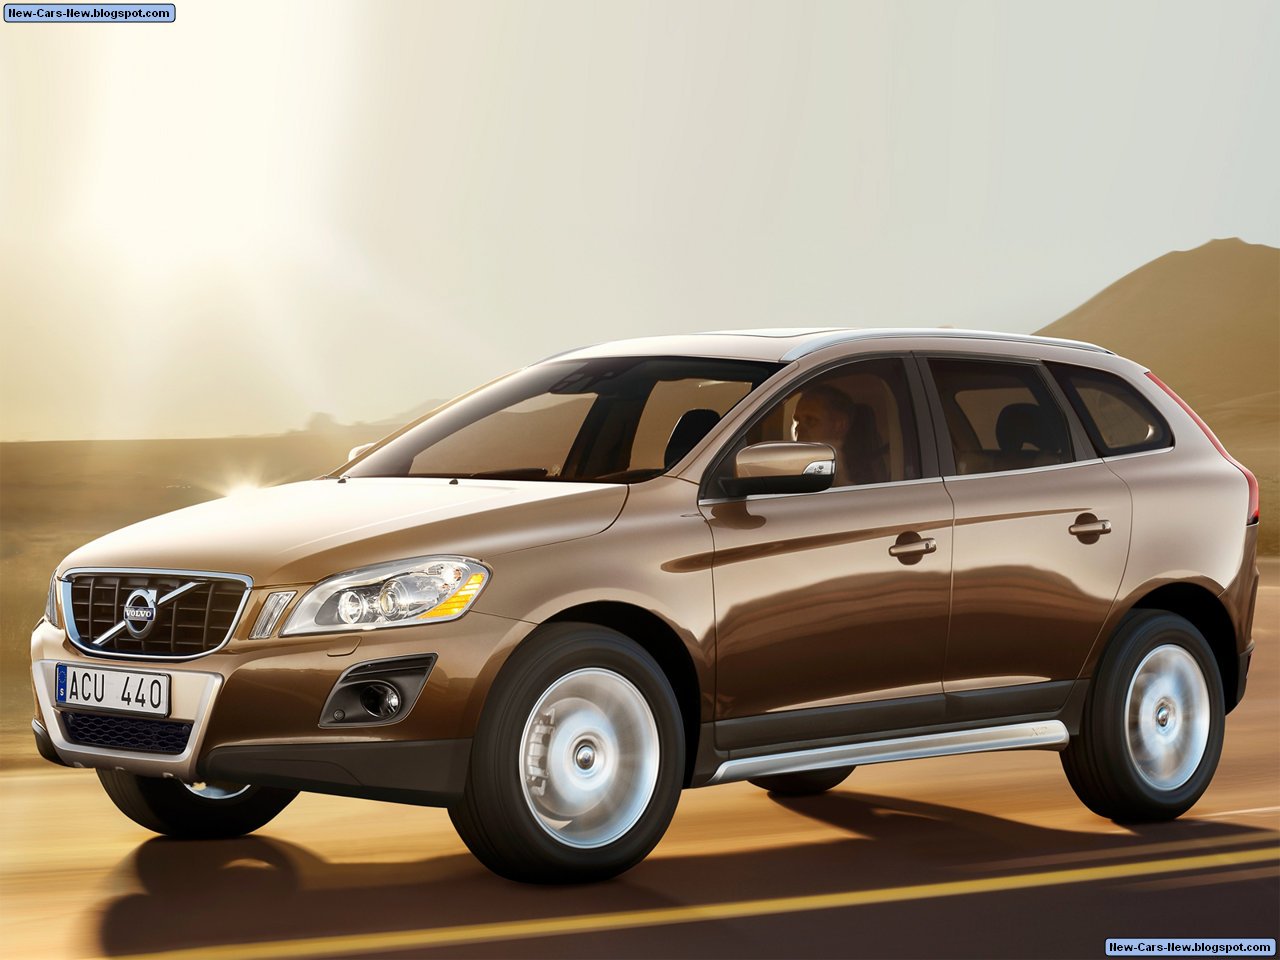 ... Volvo Xc60 Photo Pic Wallpaper High Quality New With HD Wallpaper